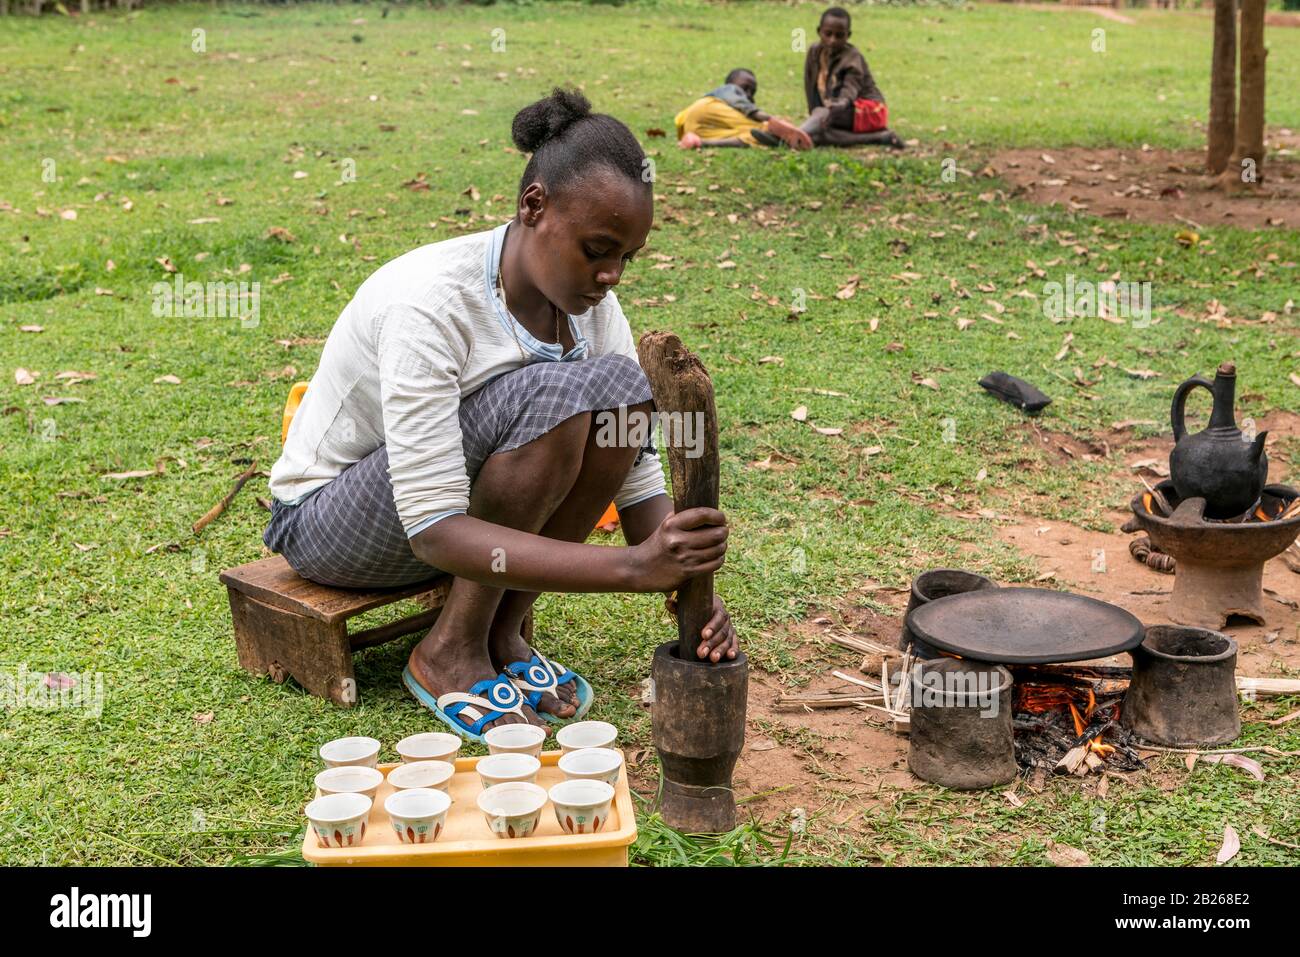 Pounding of coffee beans as part of the coffee ceremony in rural southern Ethiopia Stock Photo